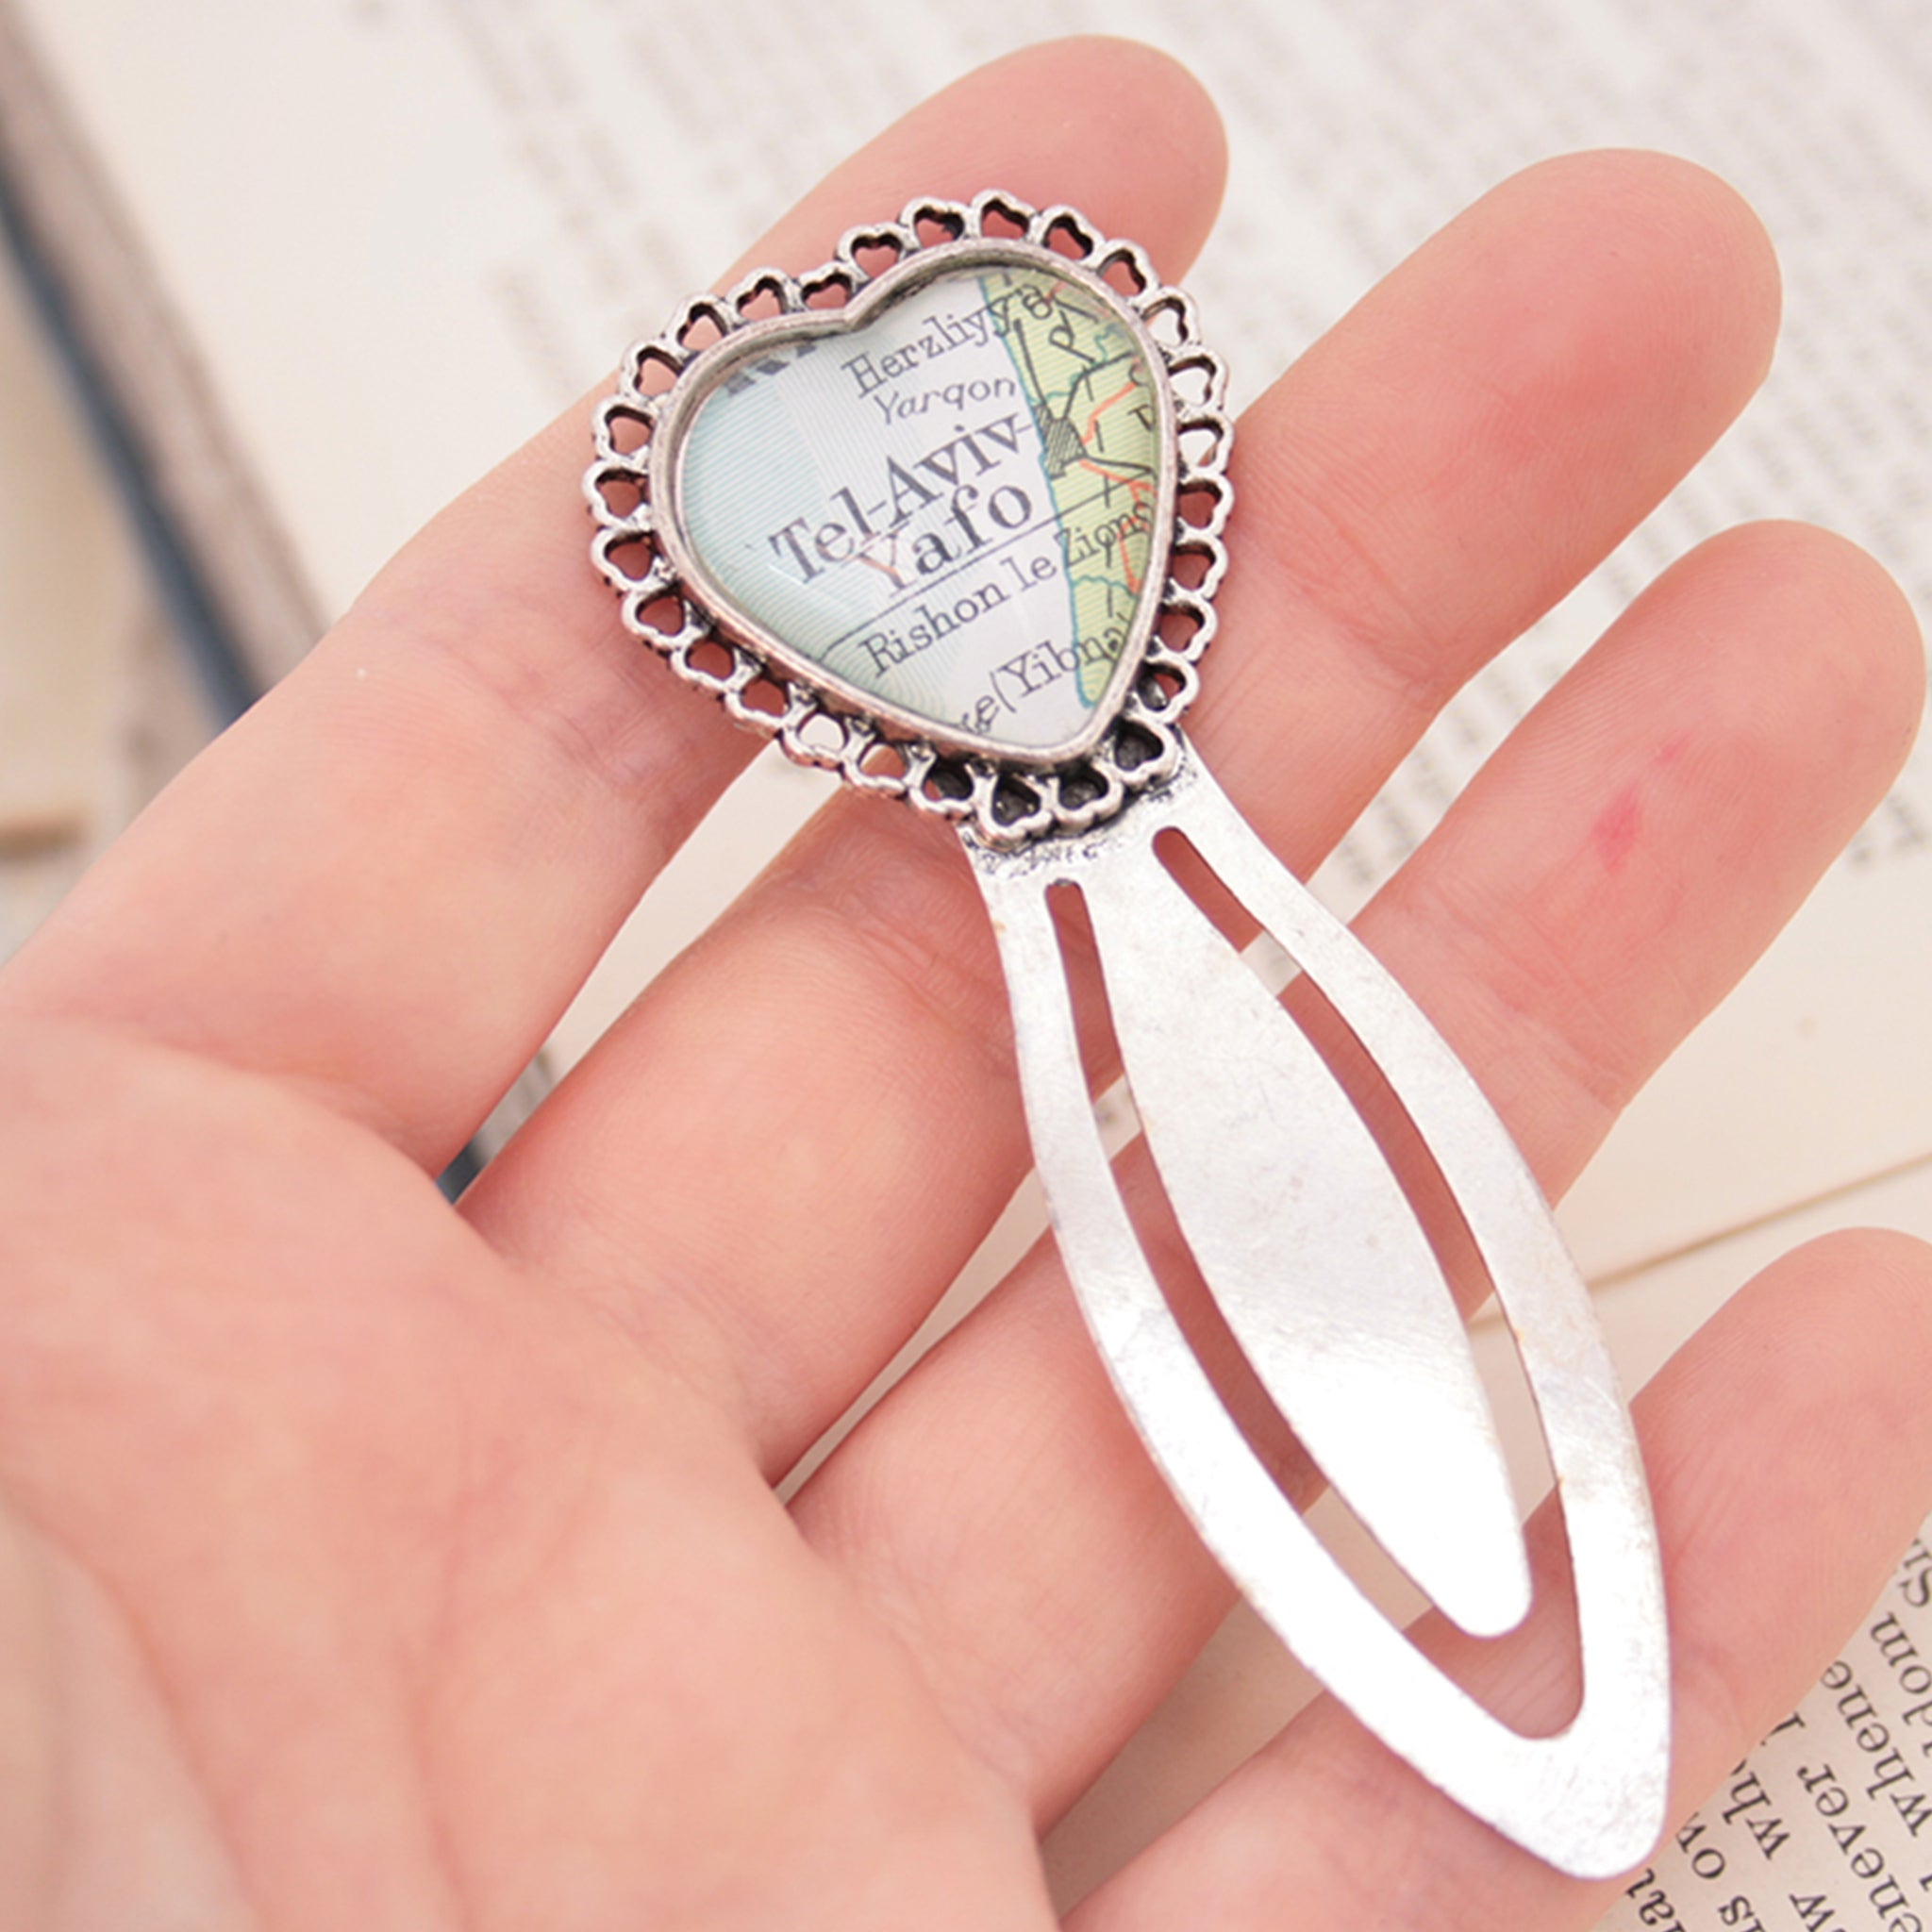 hold in hand metal bookmark in heart shape personalised with map of Tel Aviv